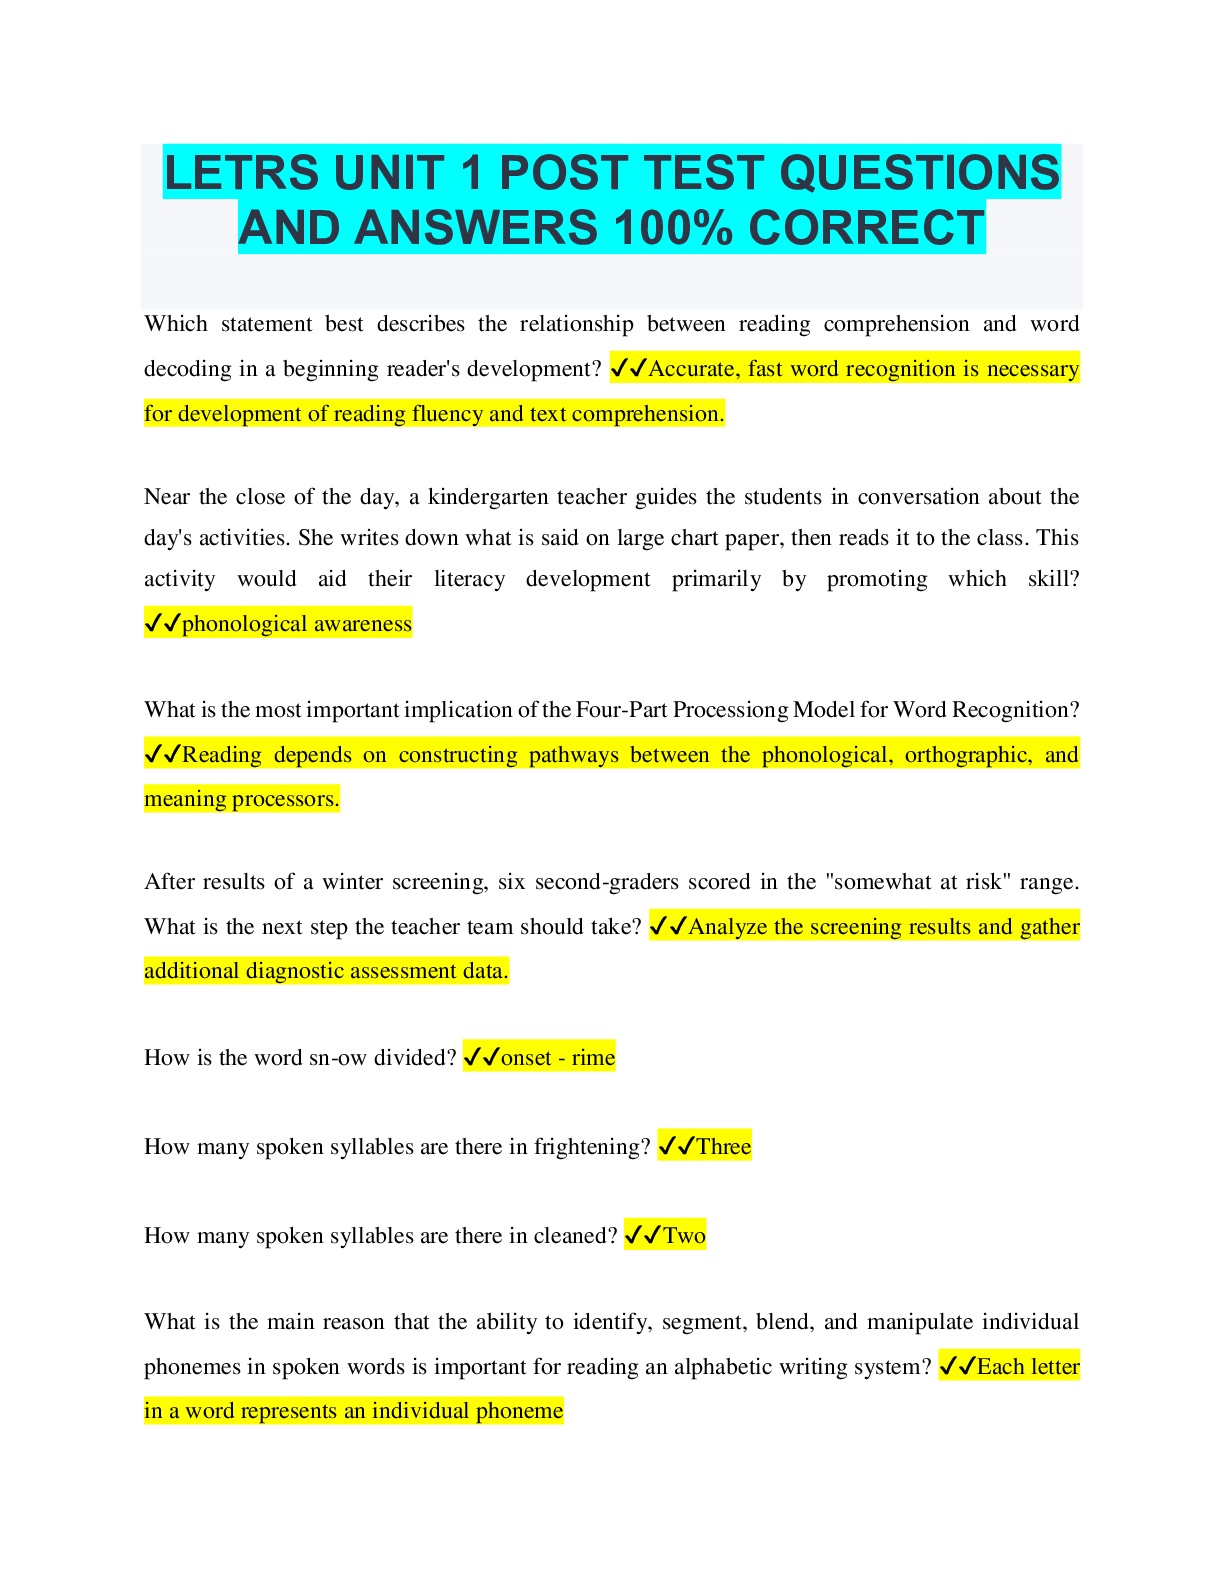 LETRS UNIT 1 POST TEST QUESTIONS AND ANSWERS 100% CORRECT Browsegrades